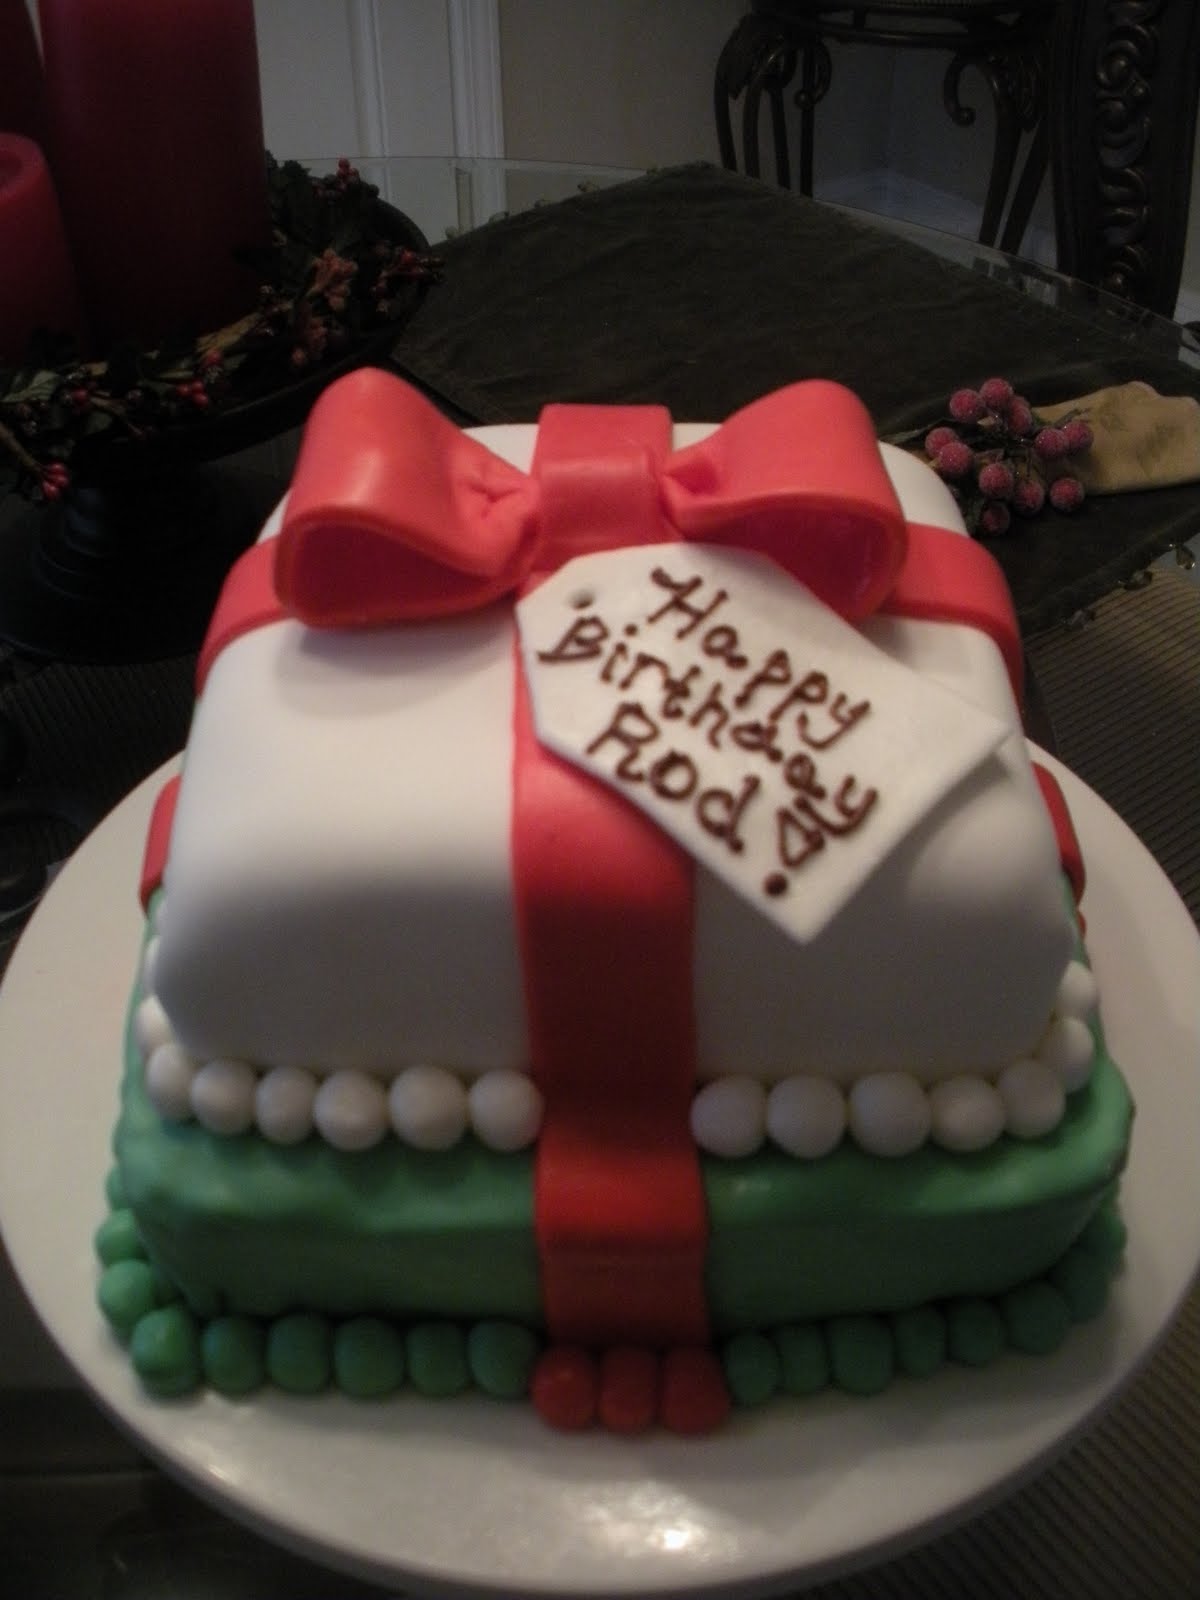 to the Mad House Birthday / Christmas cake order